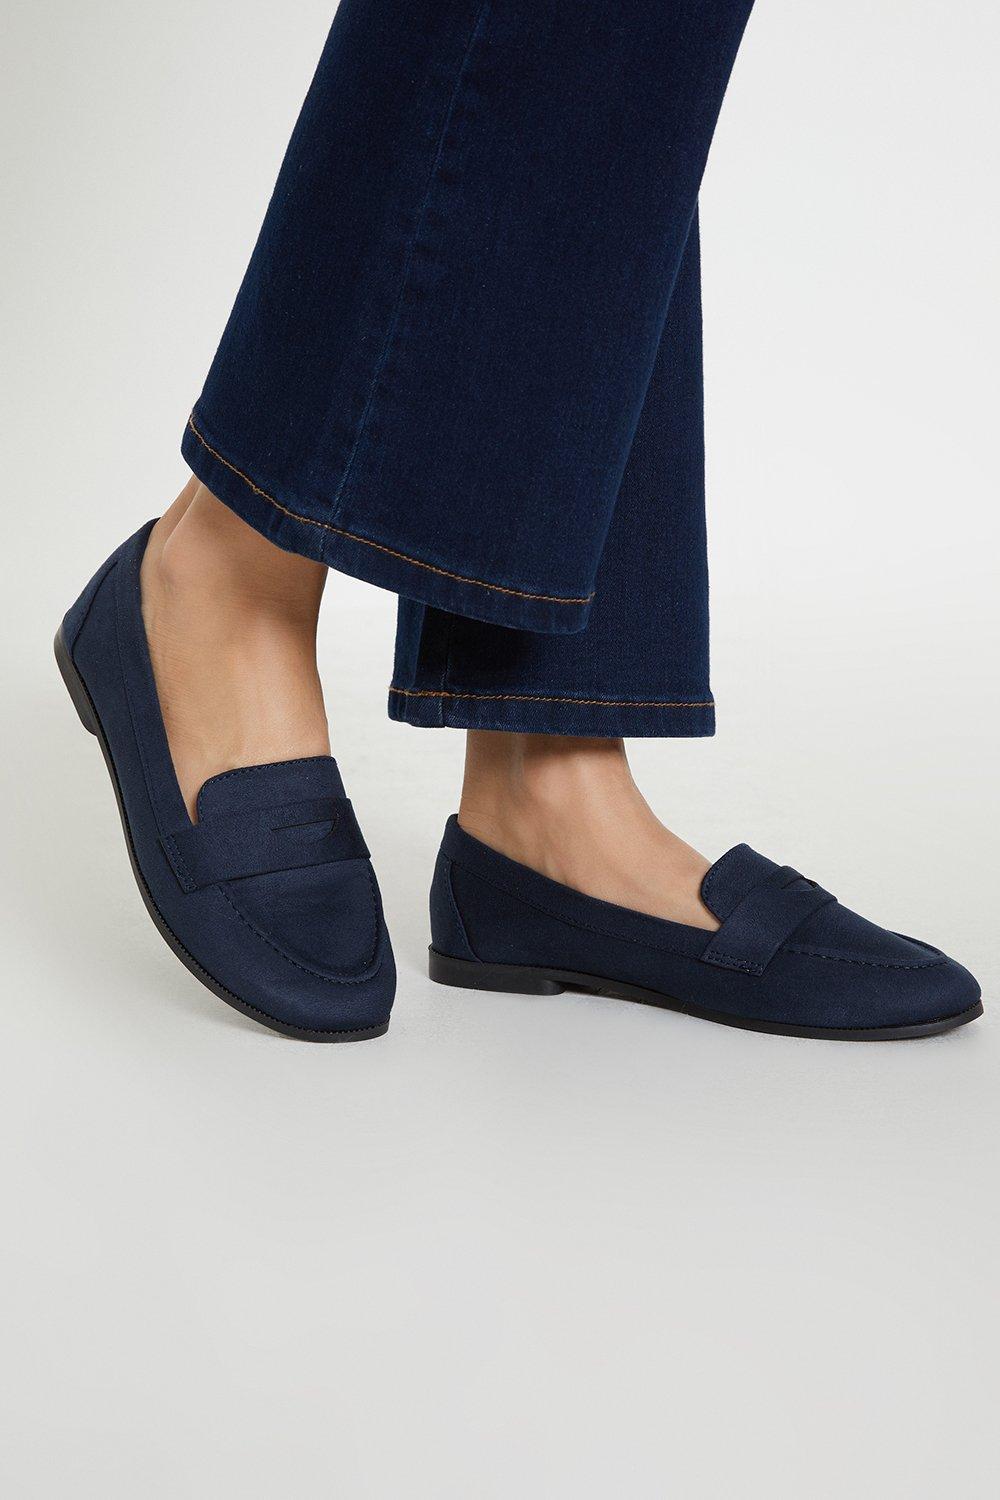 Women’s Wide Fit Lana Penny Loafers - navy - 5